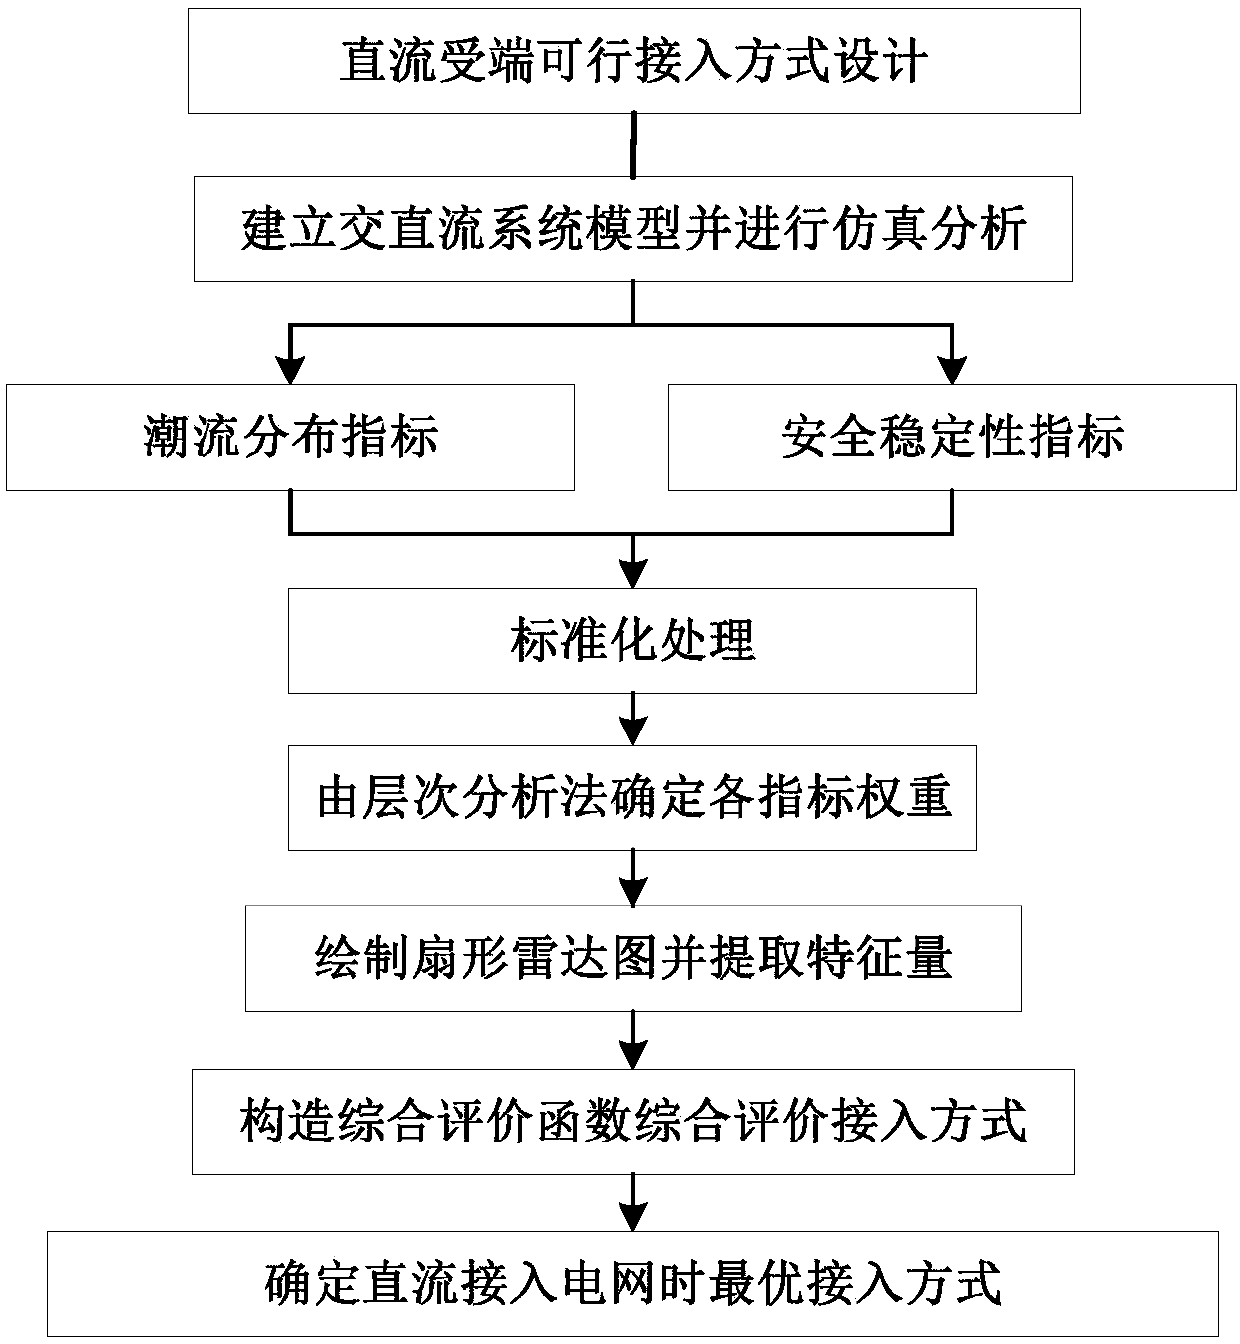 Quantitative evaluation index system of ultrahigh voltage connection mode and comprehensive evaluation method